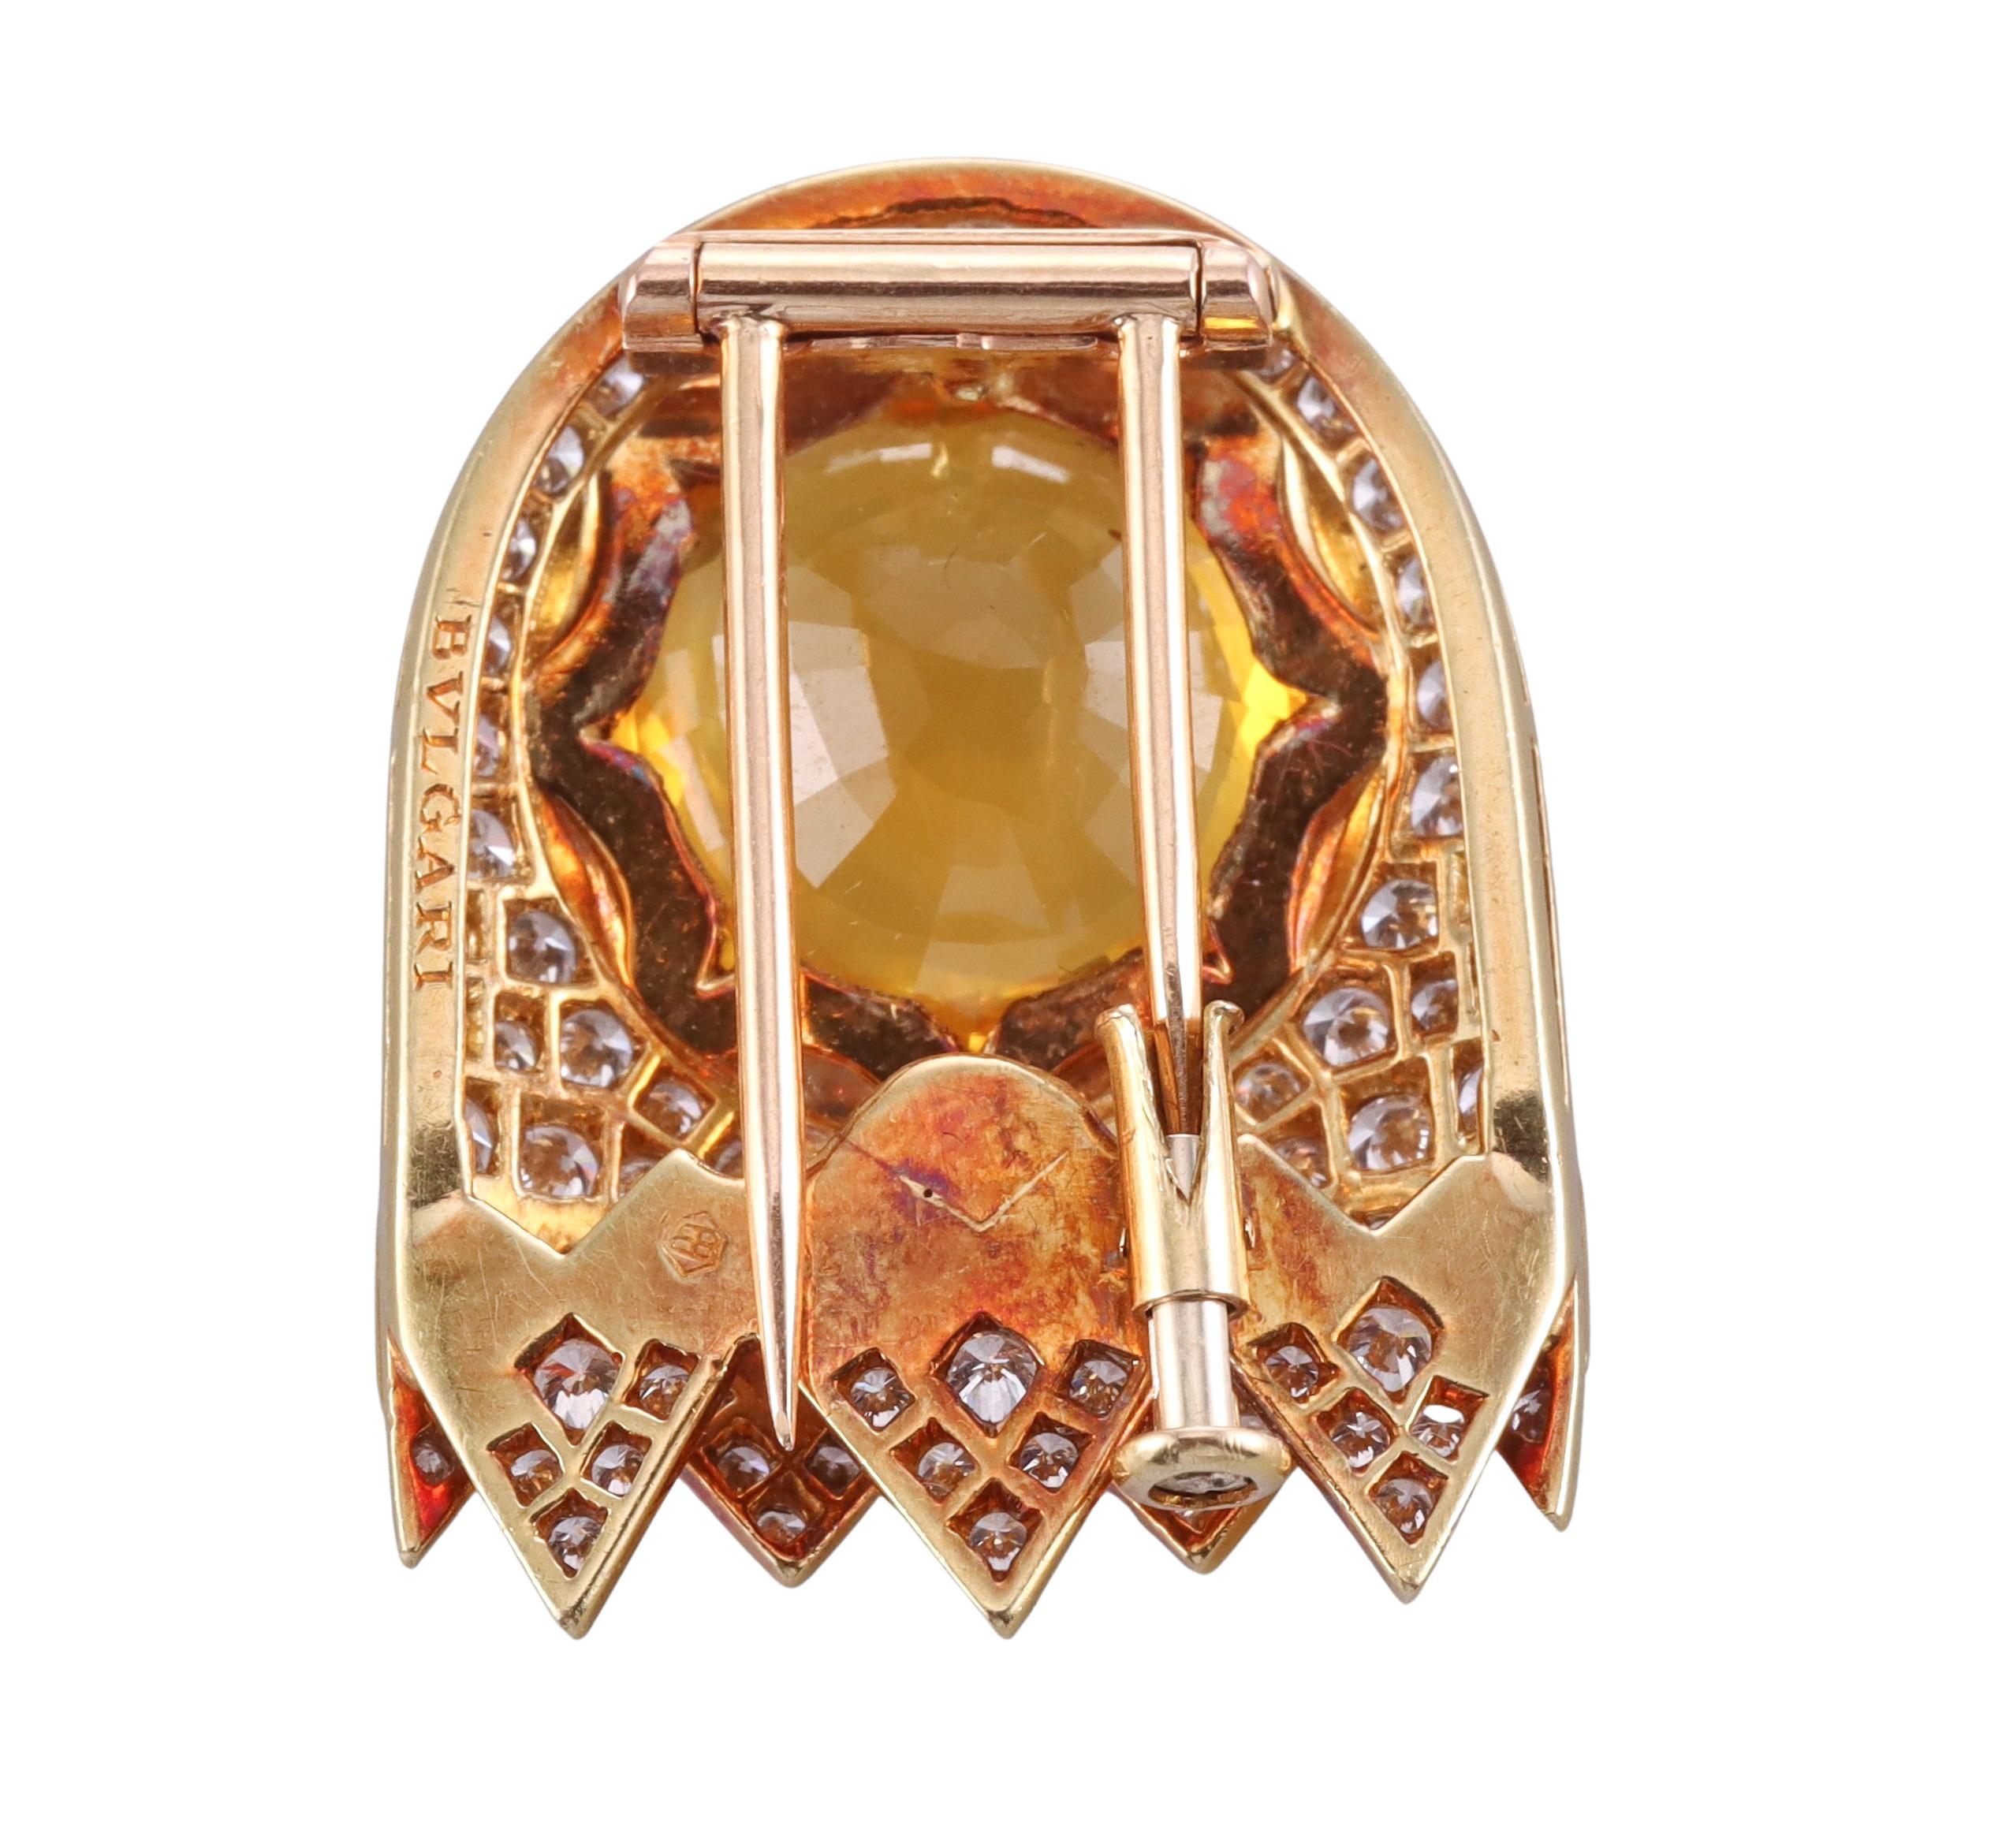 Vintage, circa 1980s Bvlgari brooch, set in 18k yellow gold, with center approx. 8ct citrine ( the stone measures 15.2 x 15.2 x 7.15mm), surrounded with blue sapphires and a total of approx. 2.50ctw in G/VS diamonds. The brooch measures 1.25